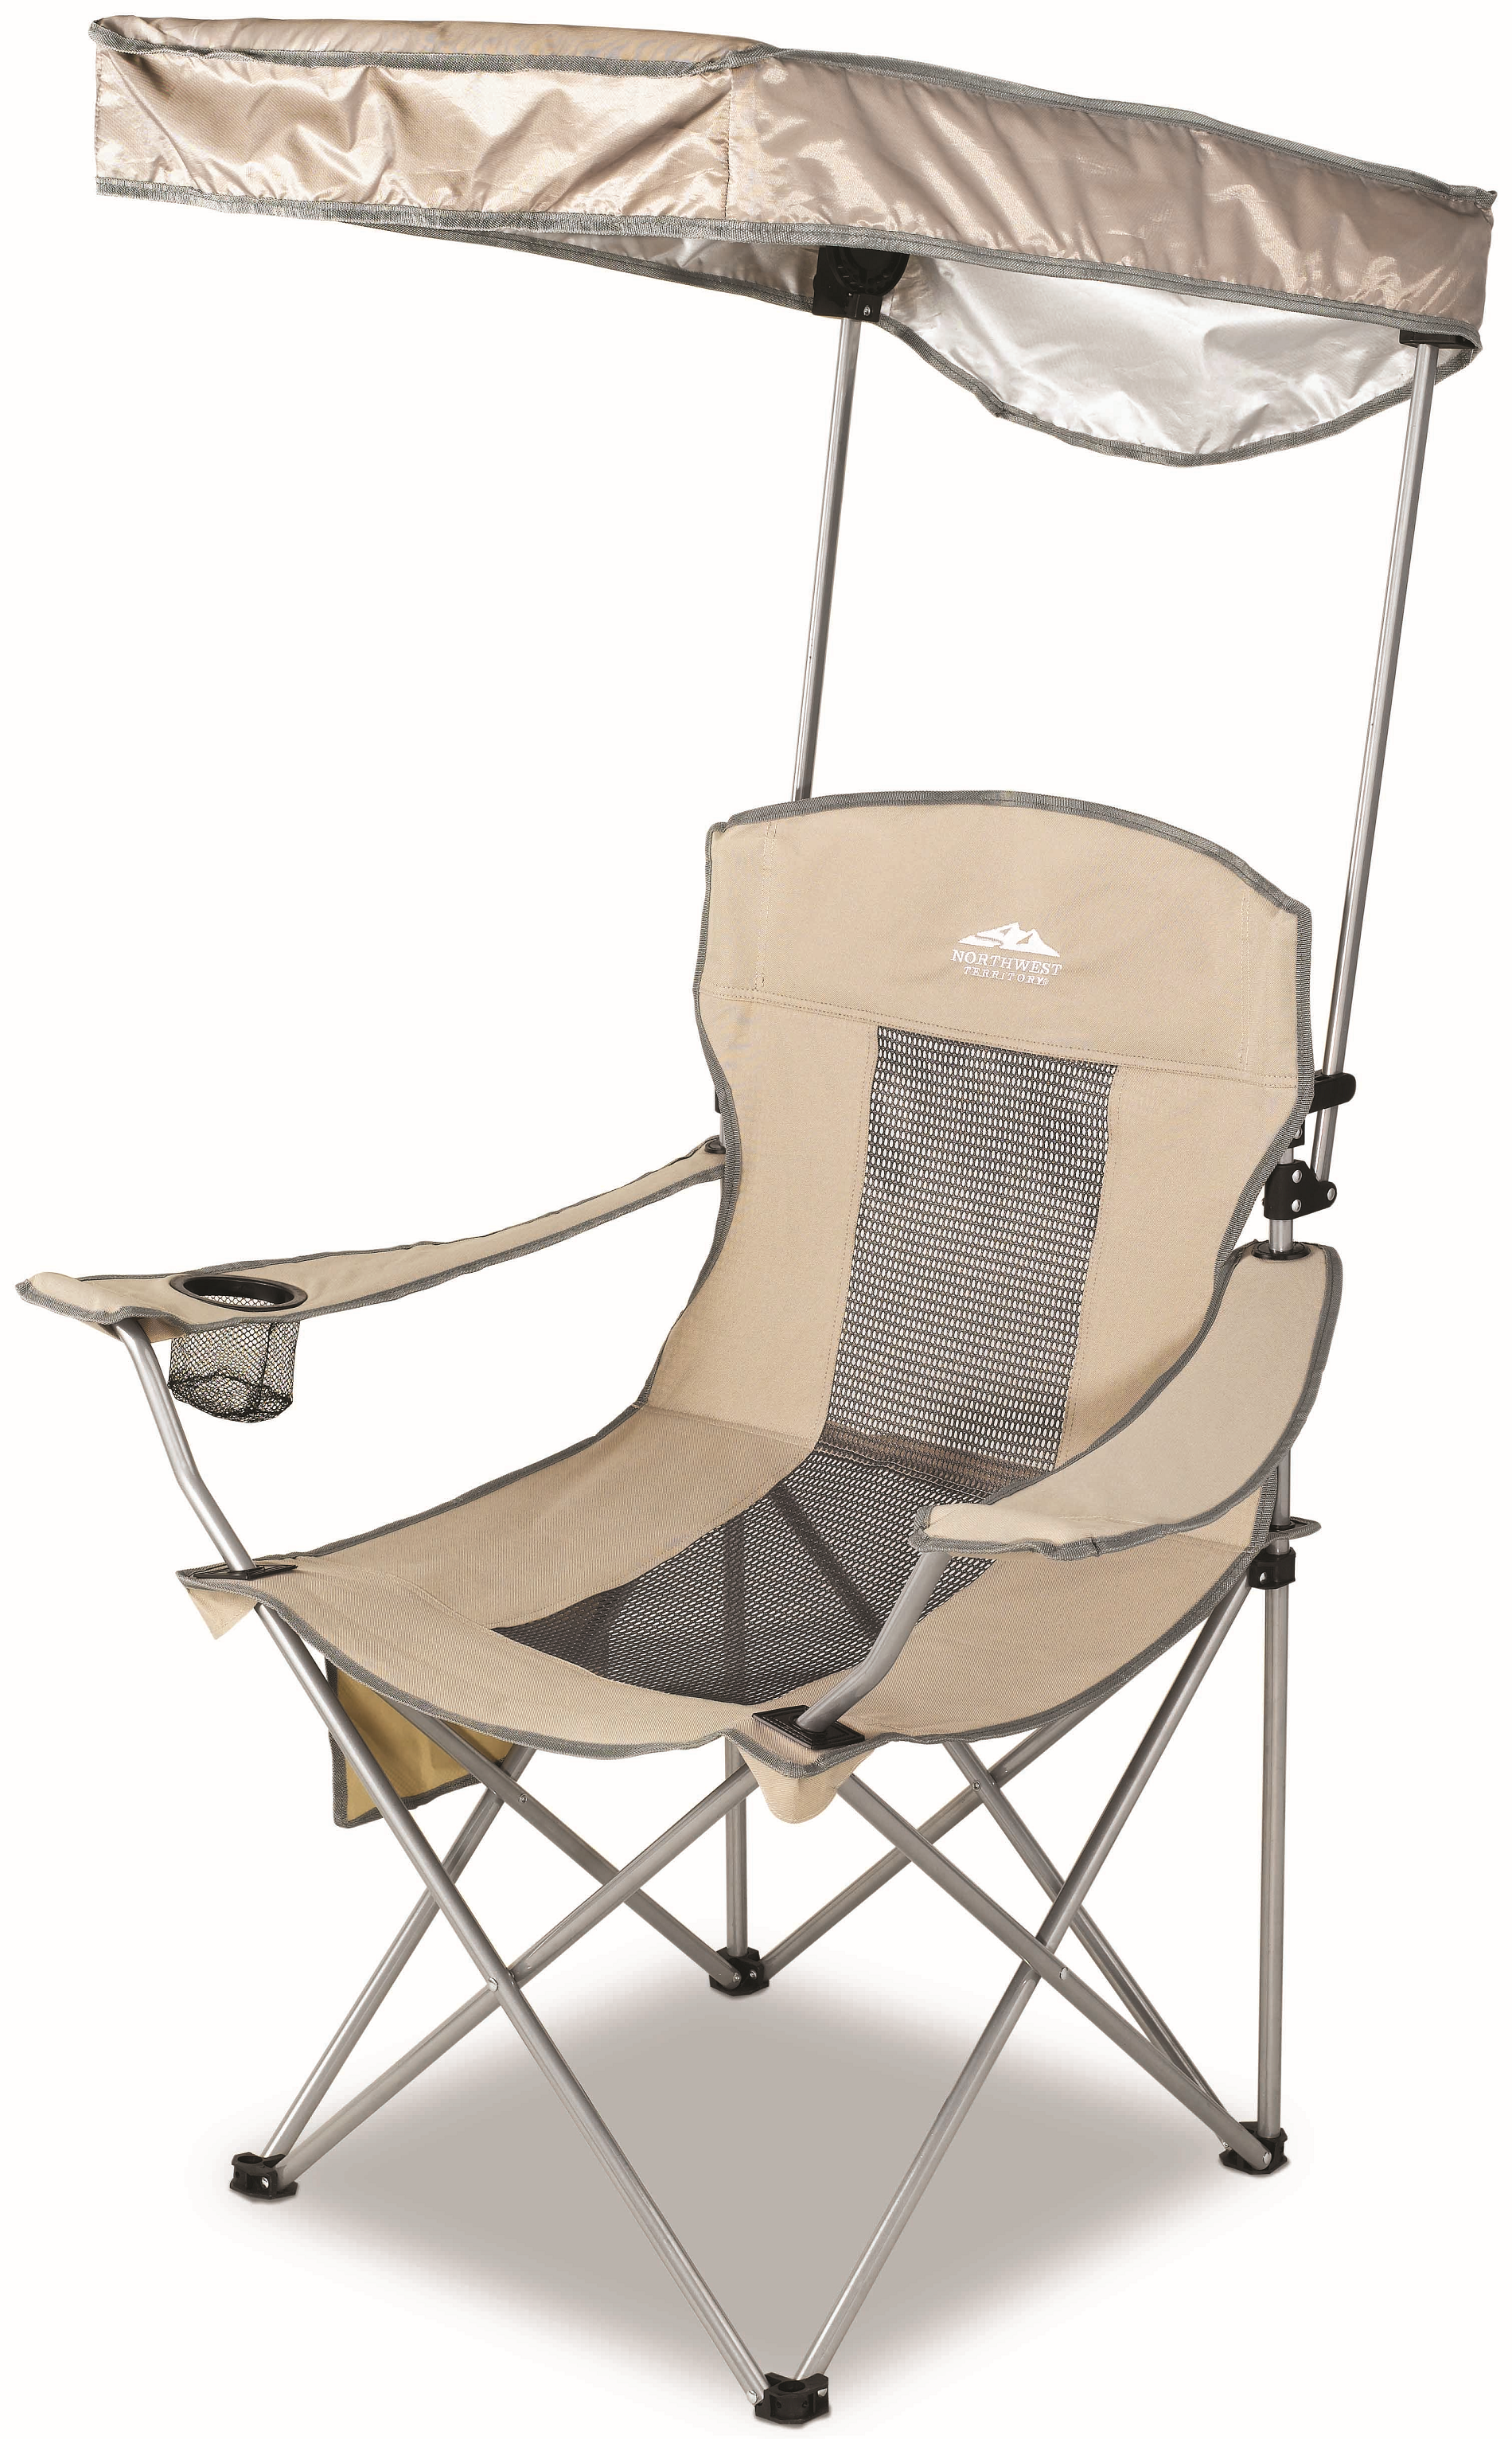 Northwest Territory Cooler Quad Chair With Canopy